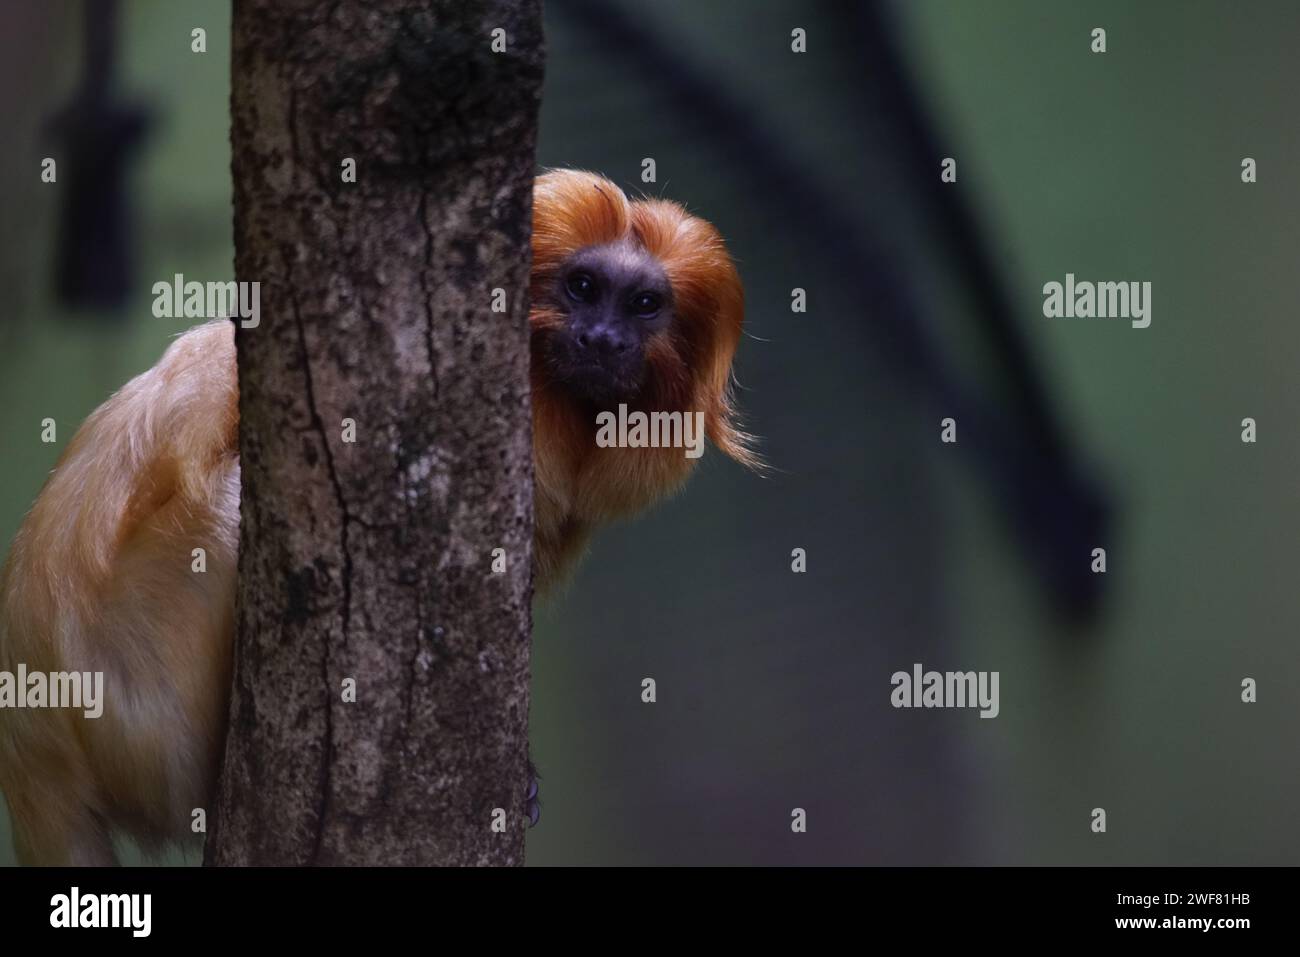 A golden lion tamarin with vibrant orange hair peeks behind a tree trunk Stock Photo